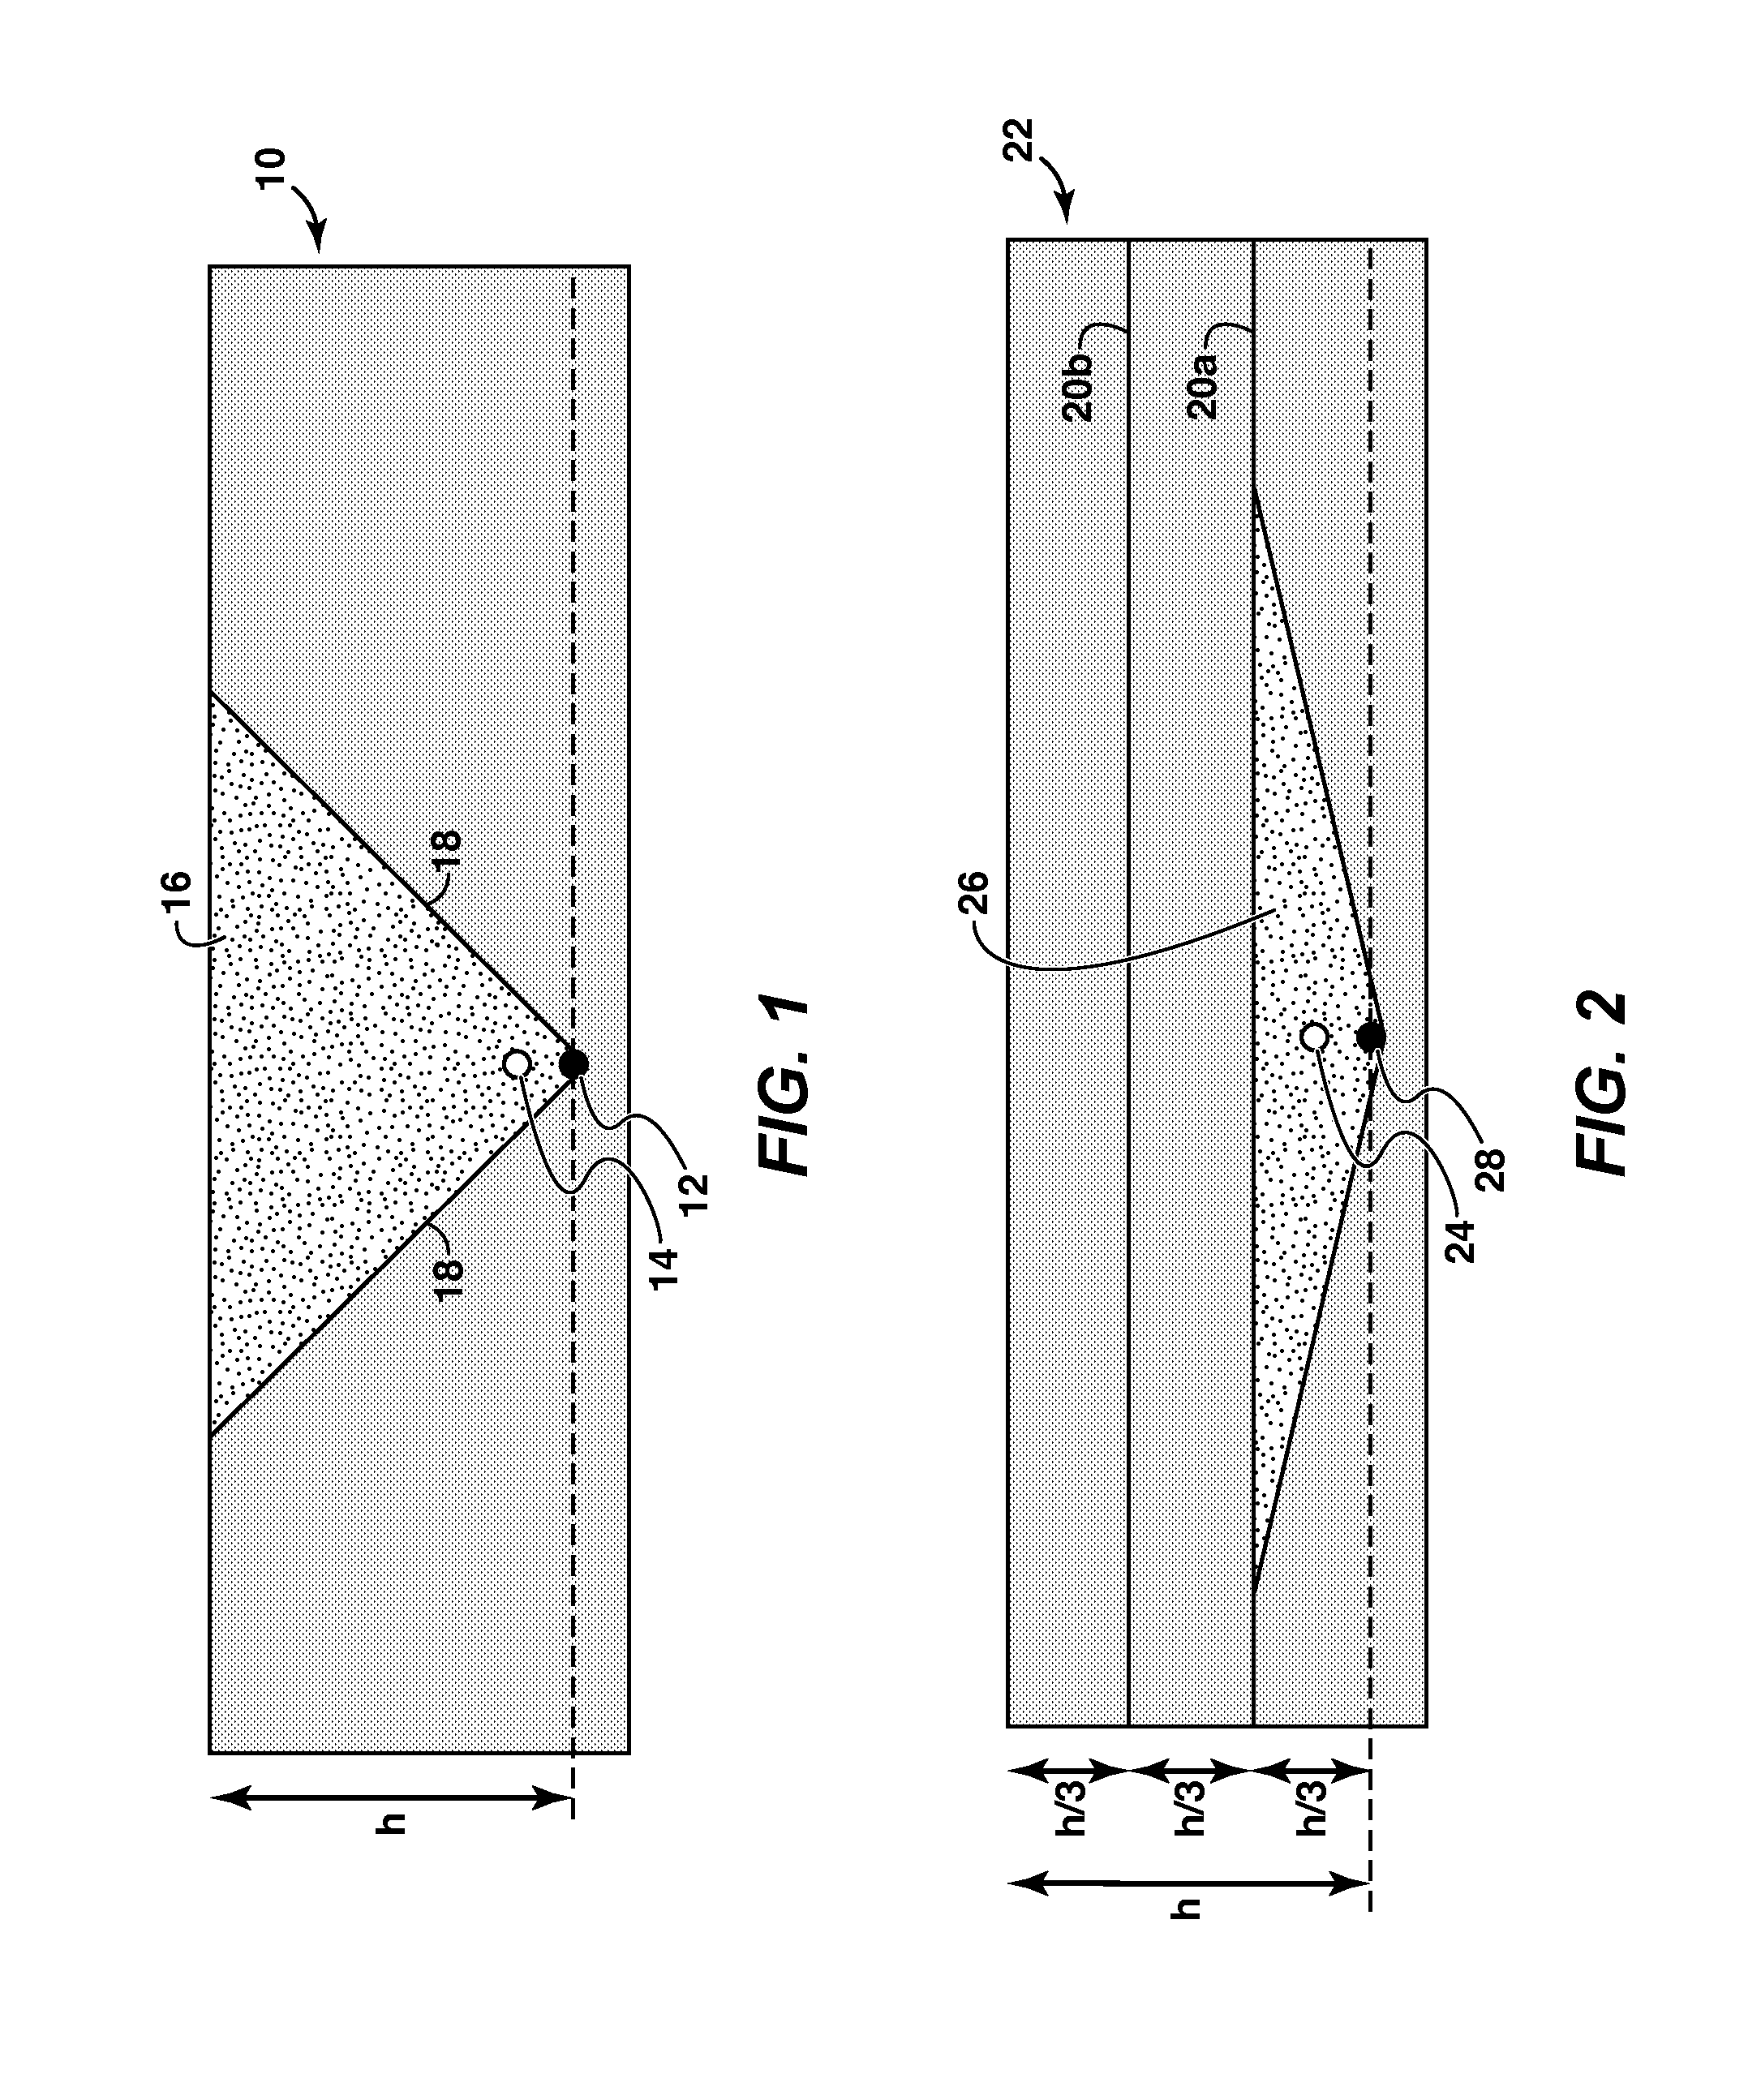 Method and System For Enhancing A Recovery Process Employing One or More Horizontal Wellbores